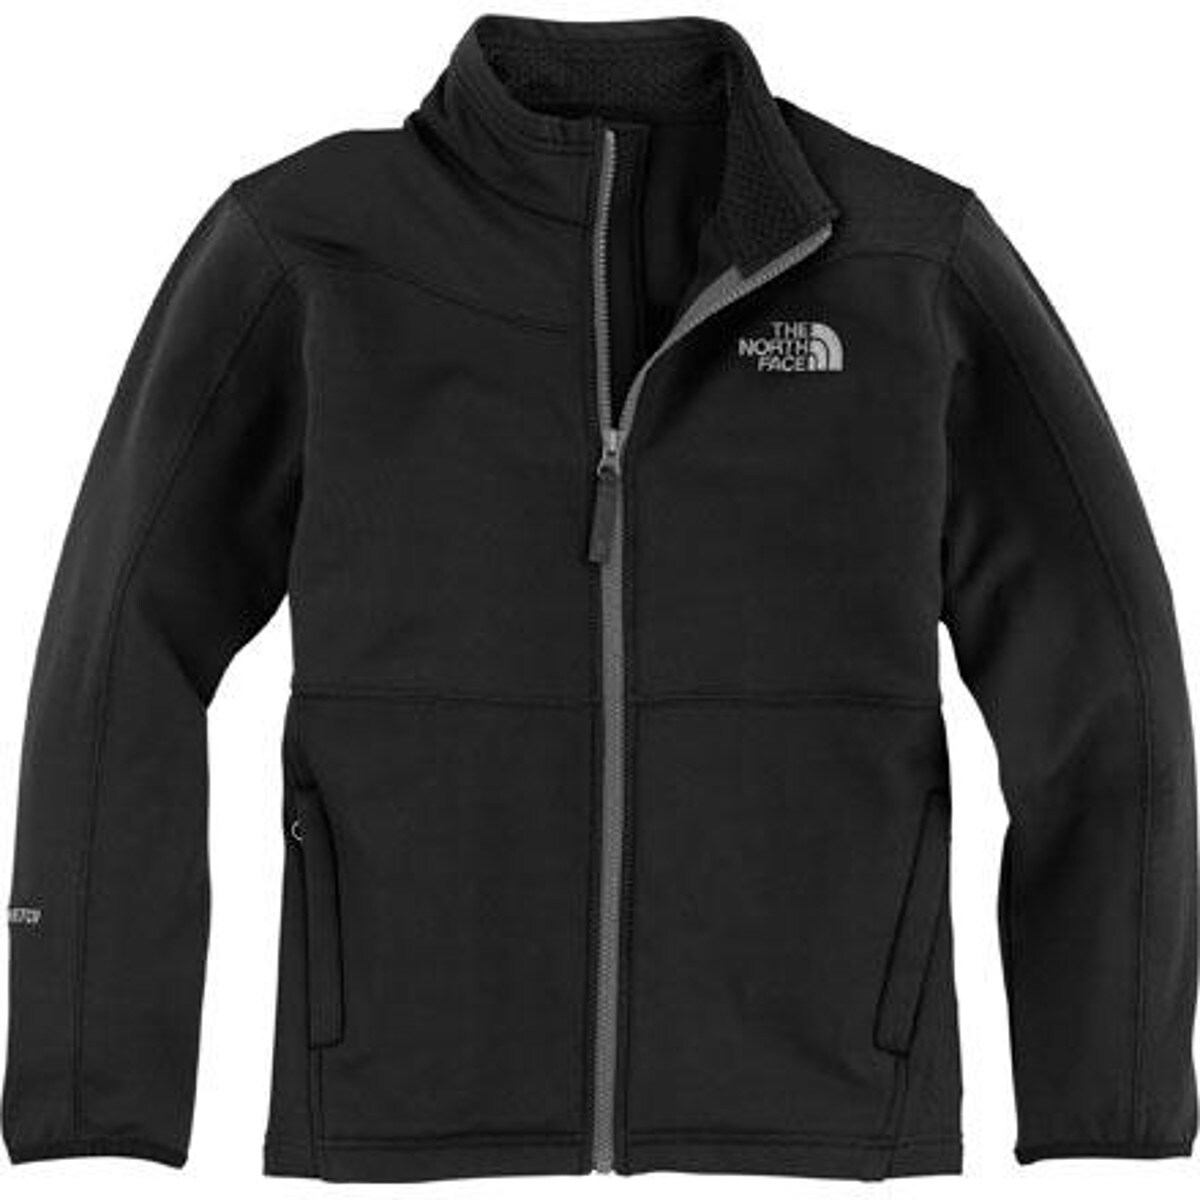 The North Face Momentum Jacket - Boys' - Kids